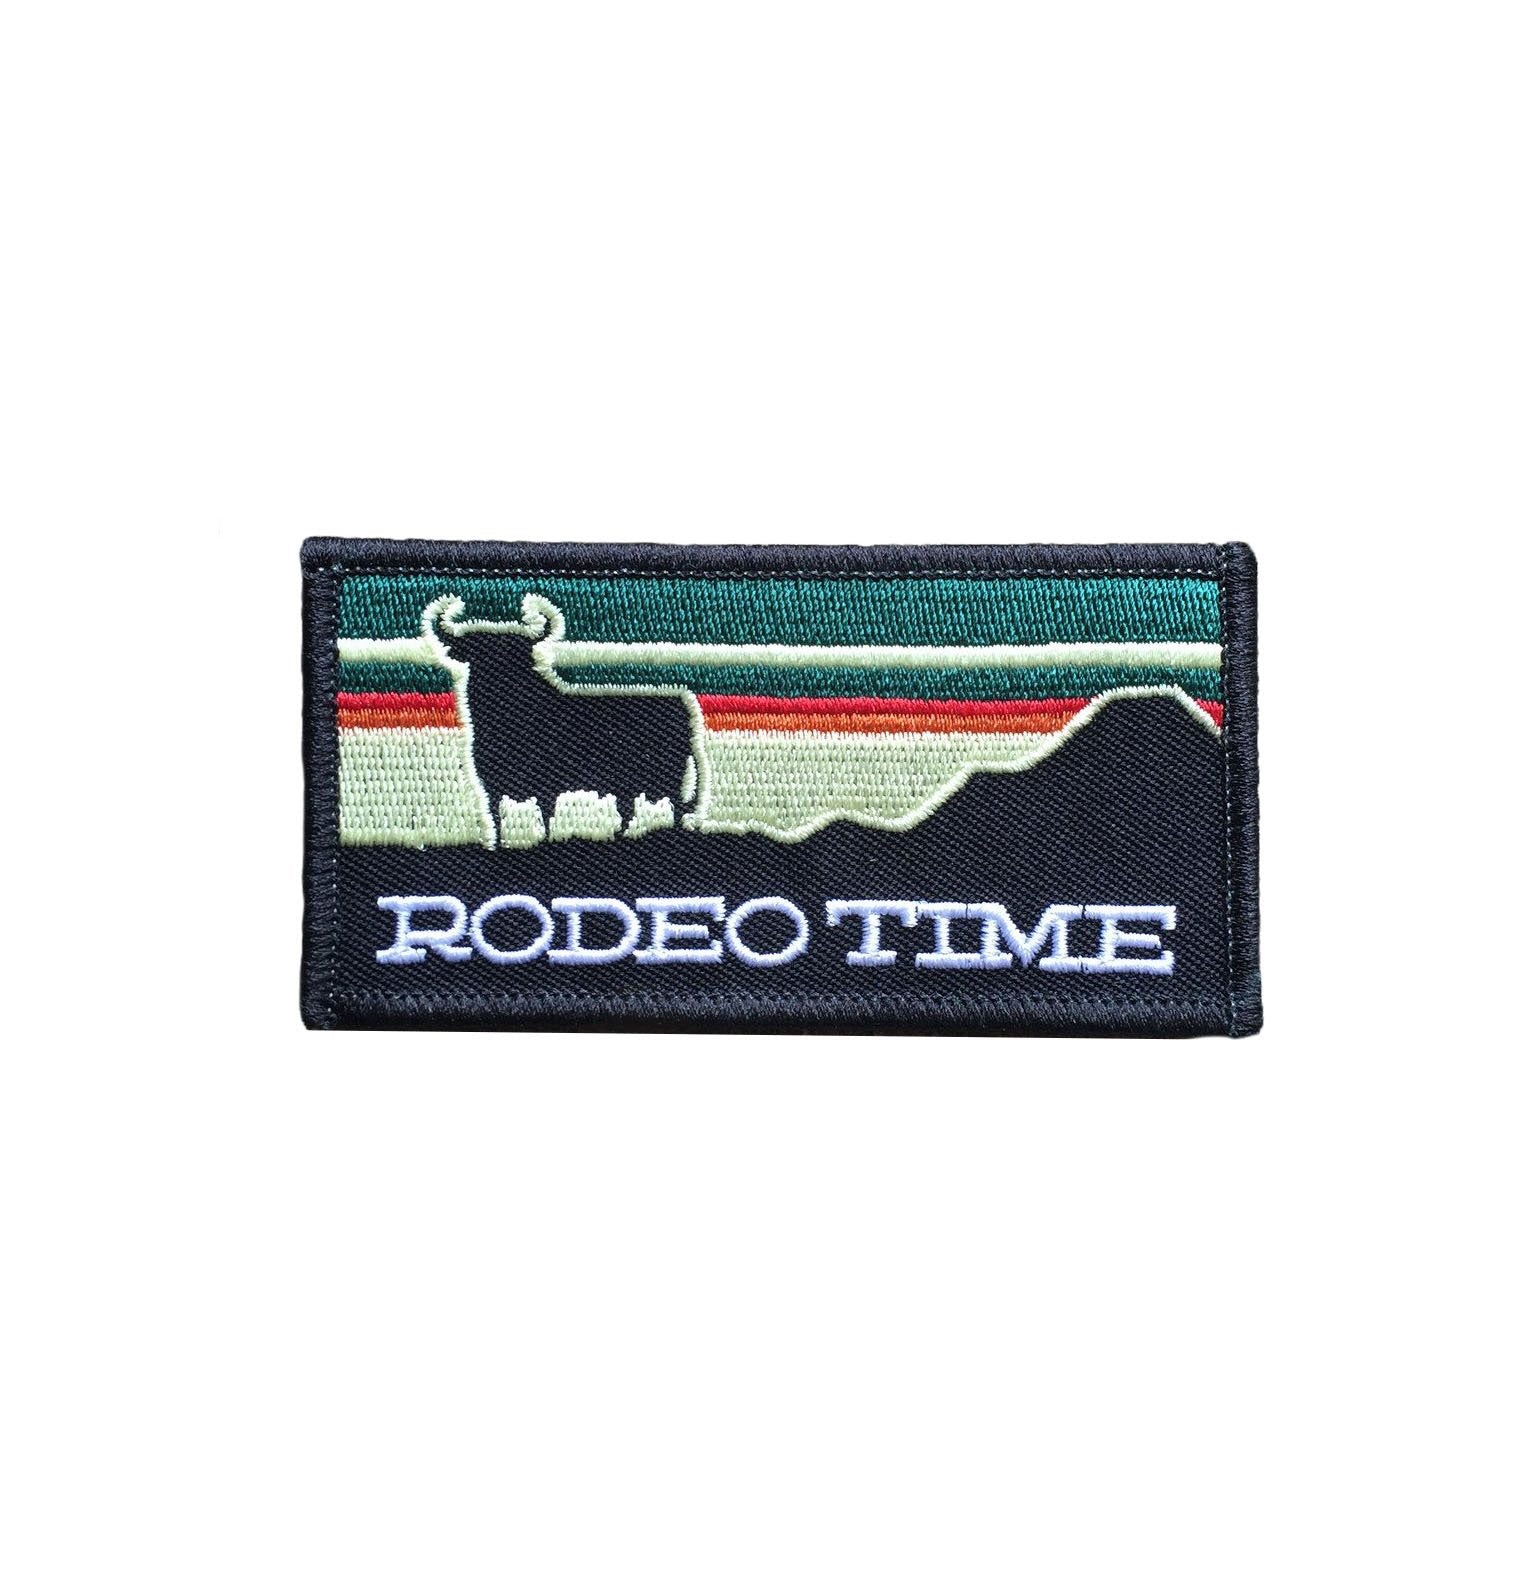 Sunset Rodeo Time Patch (FREE SHIPPING)